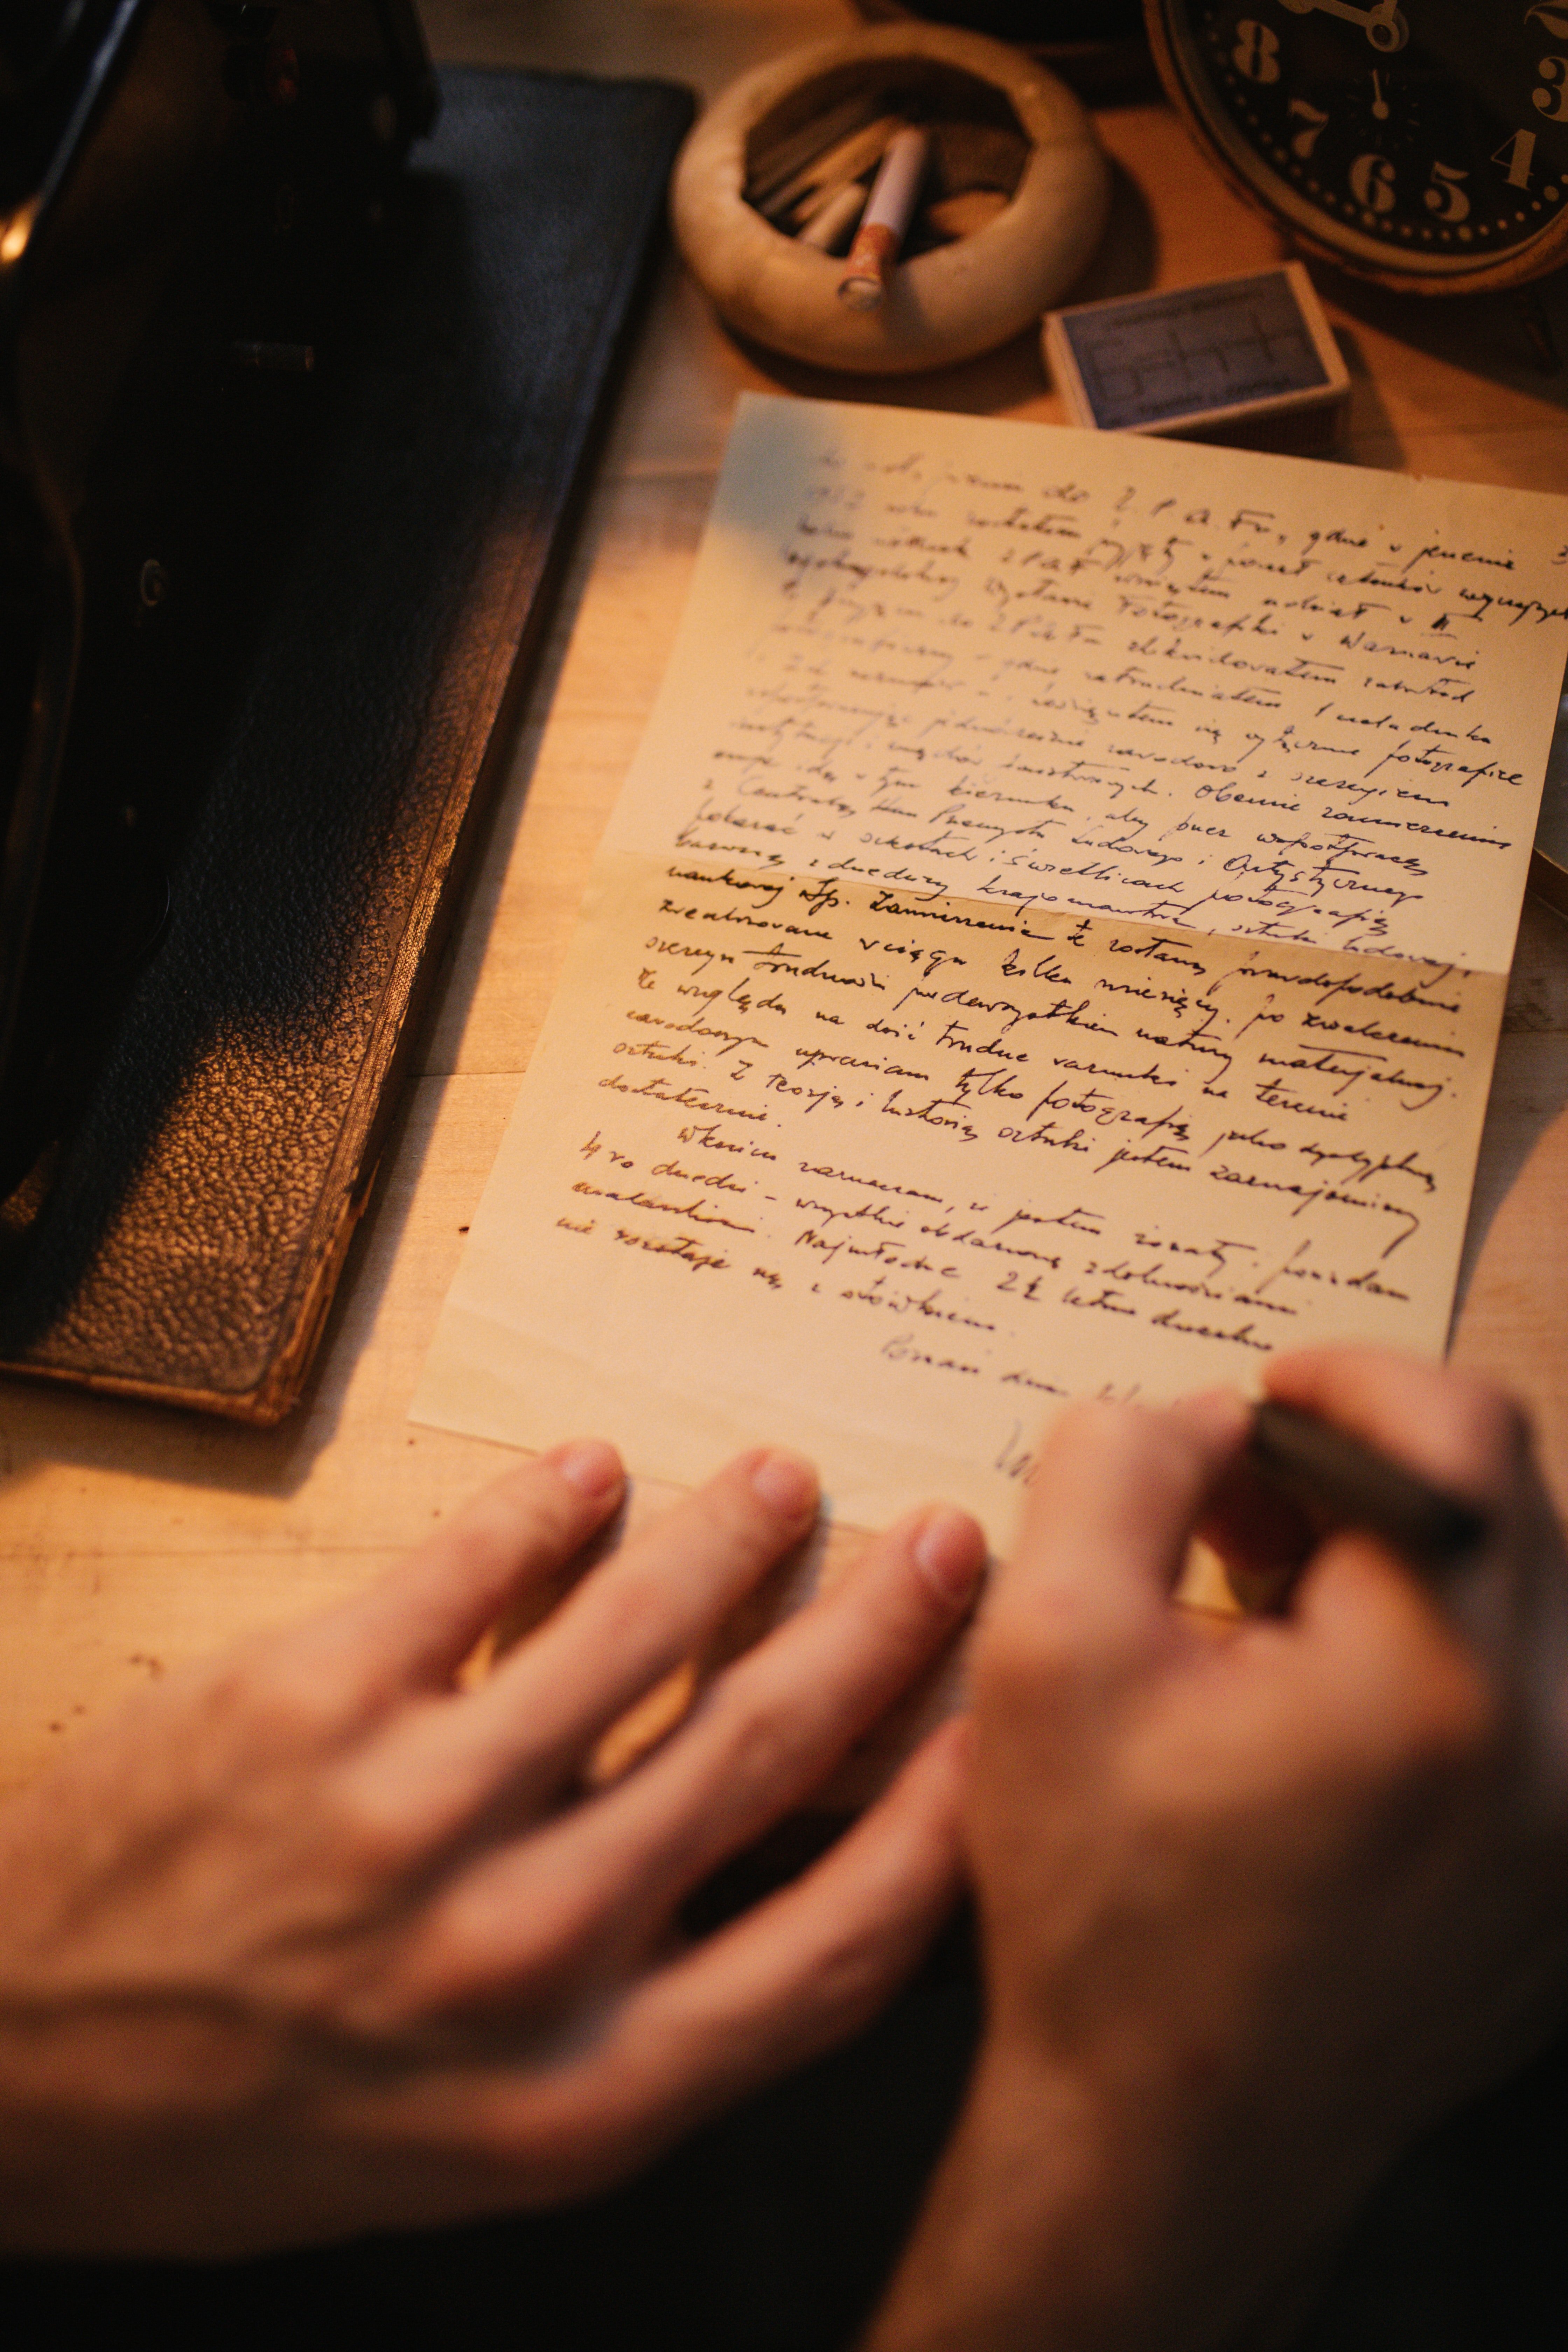 Christine wrote a letter to her father | Photo: Pexels